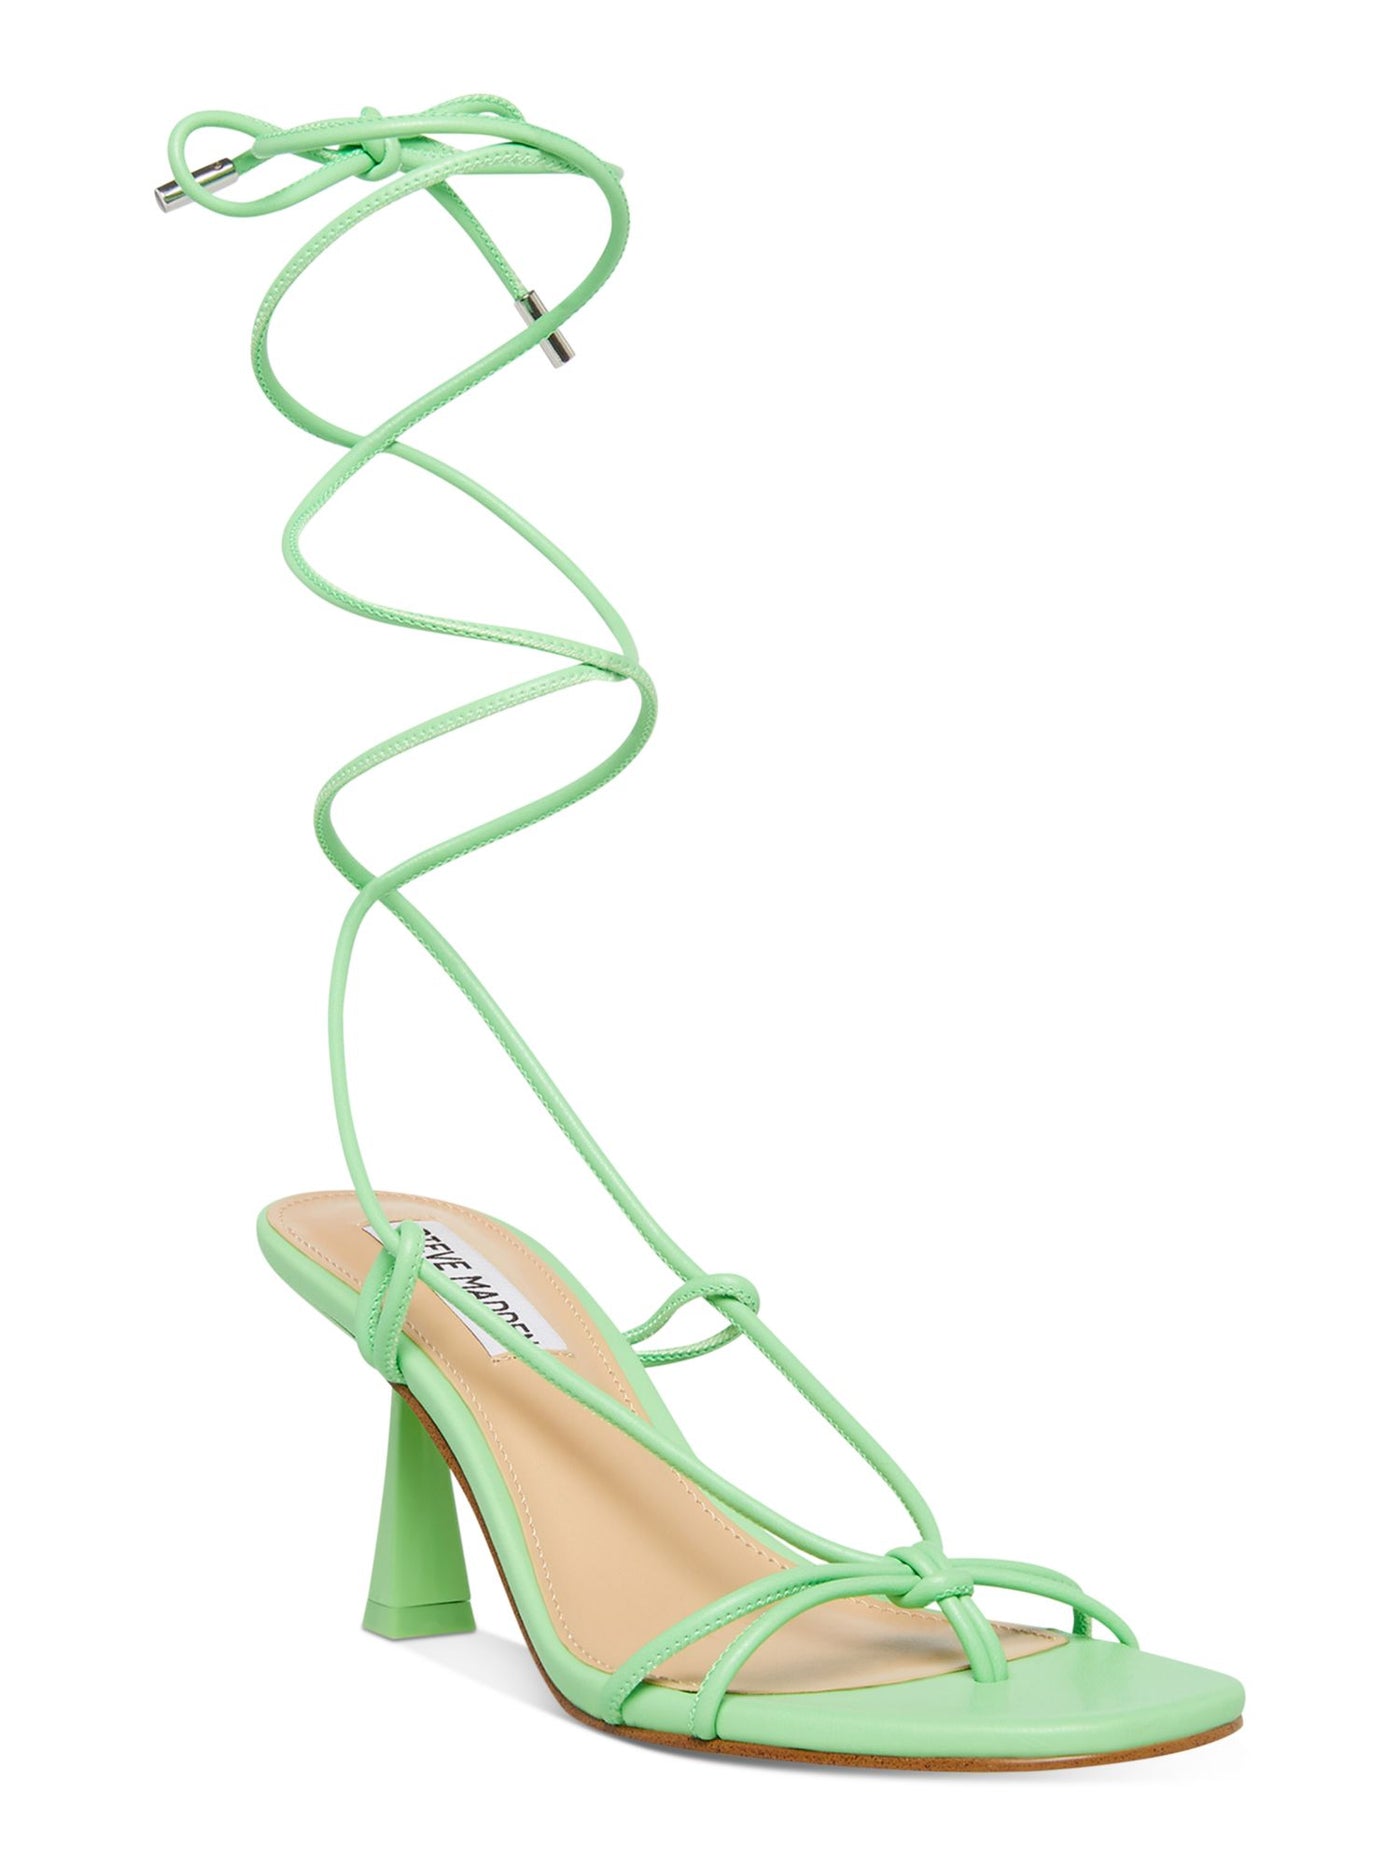 STEVE MADDEN Womens Green Wrapping Ankle Tie Padded Superb Round Toe Sculpted Heel Lace-Up Heeled Thong Sandals 9 M